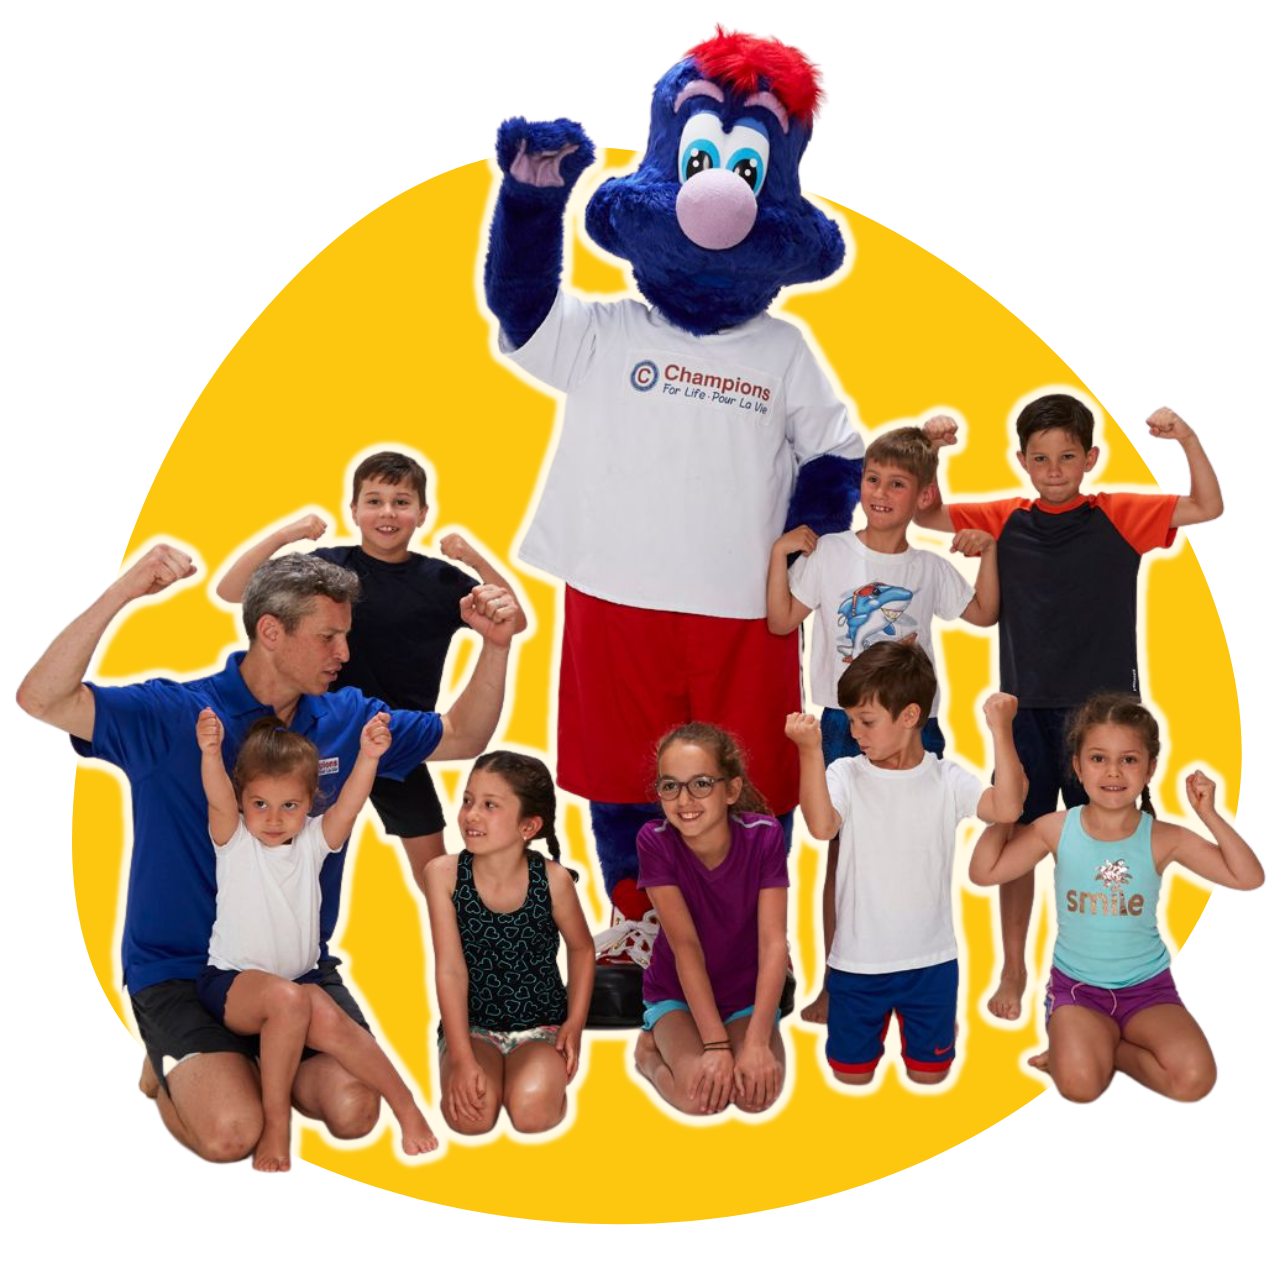 a group of children posing with a mascot wearing a shirt that says champions for life